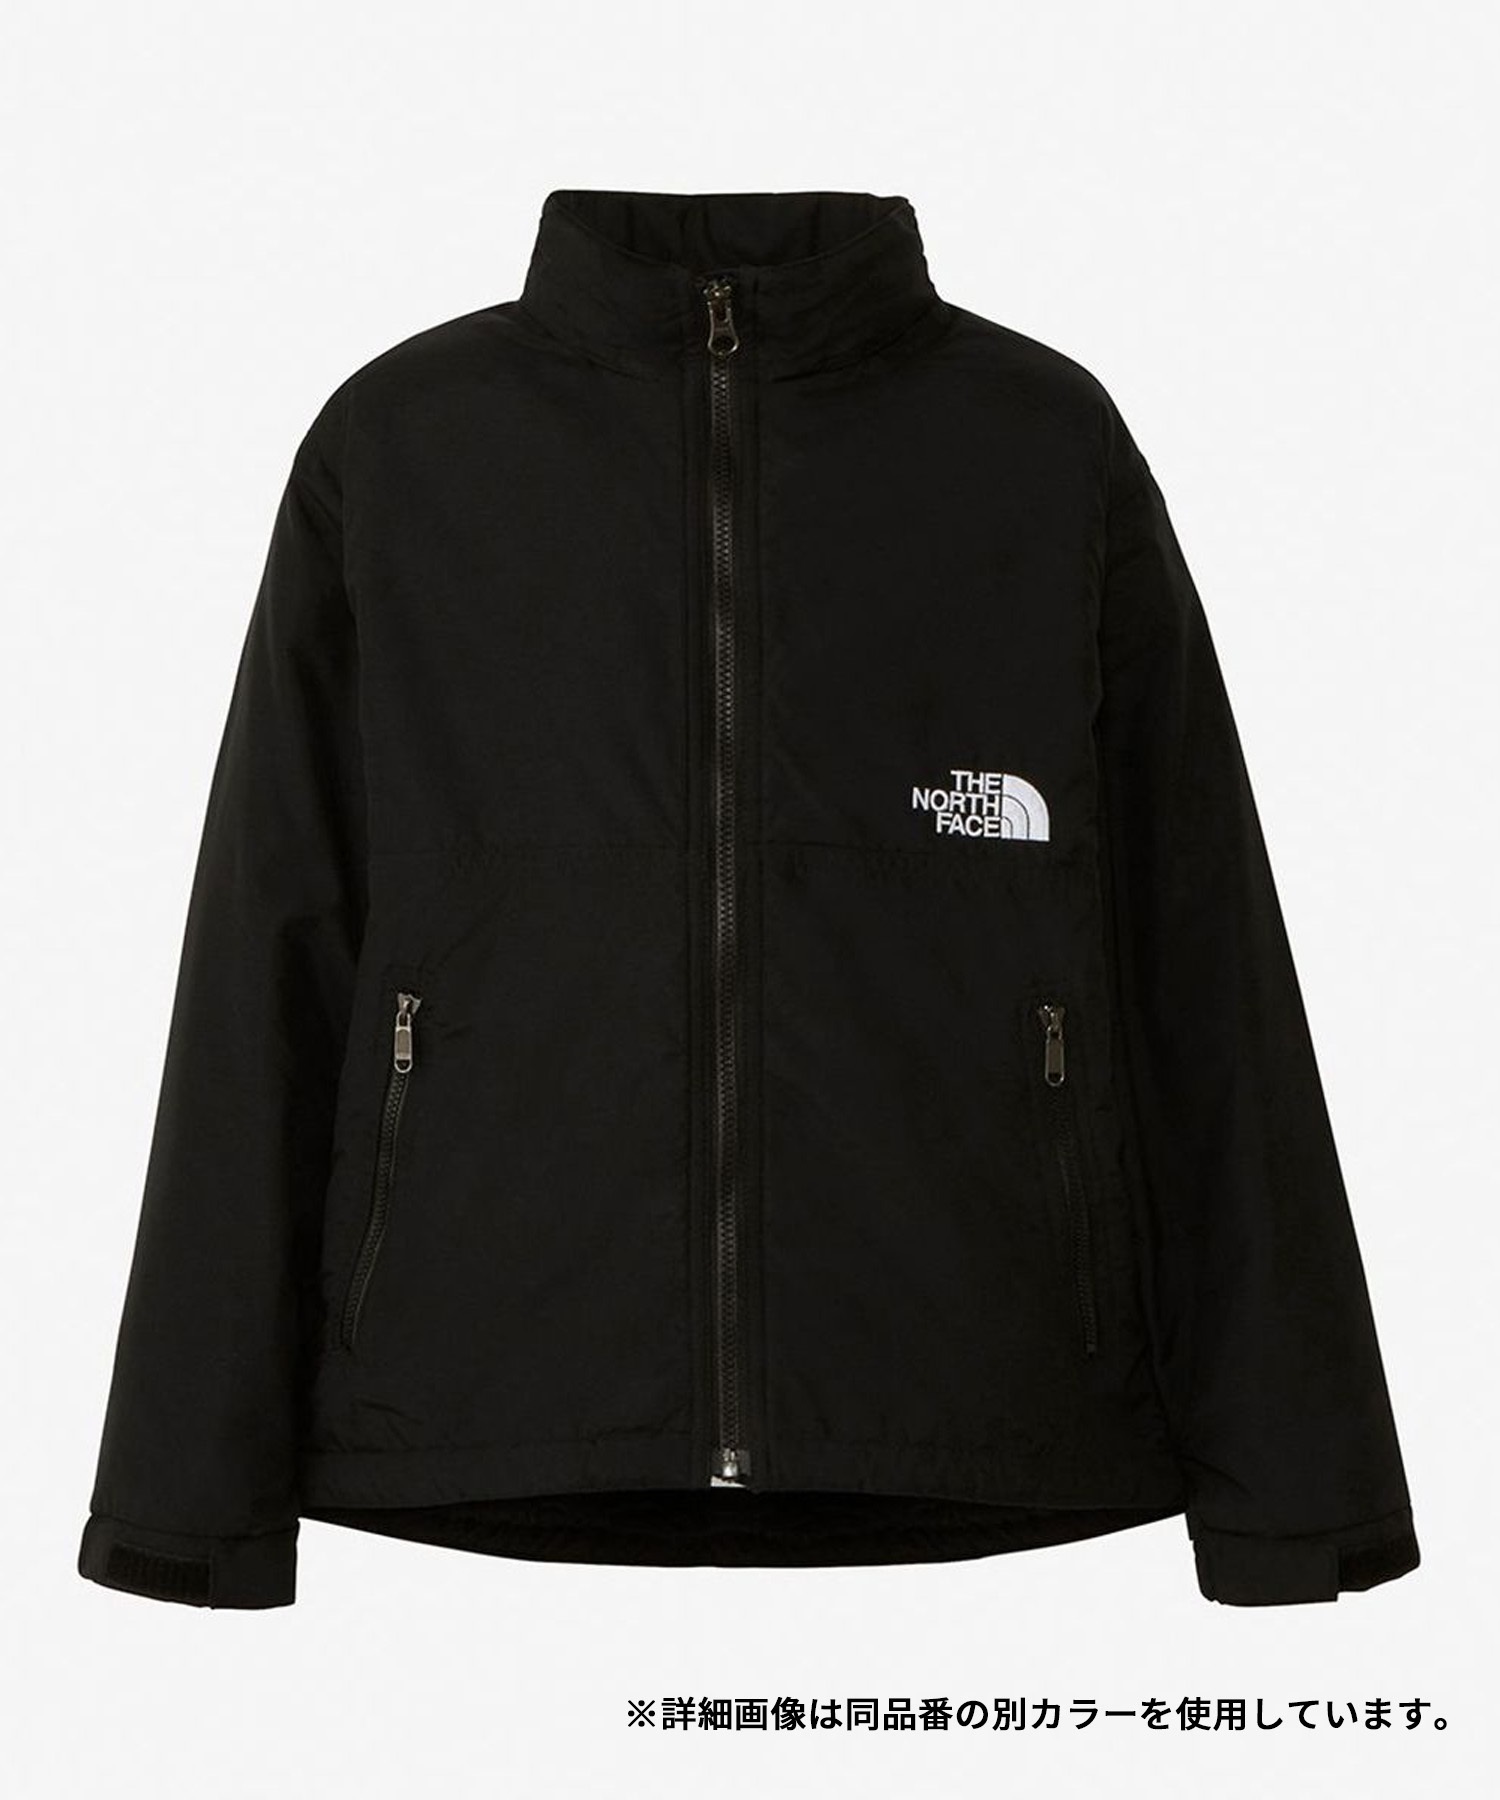 THE NORTH FACE/ザ・ノース・フェイス Compact Nomad Jacket 